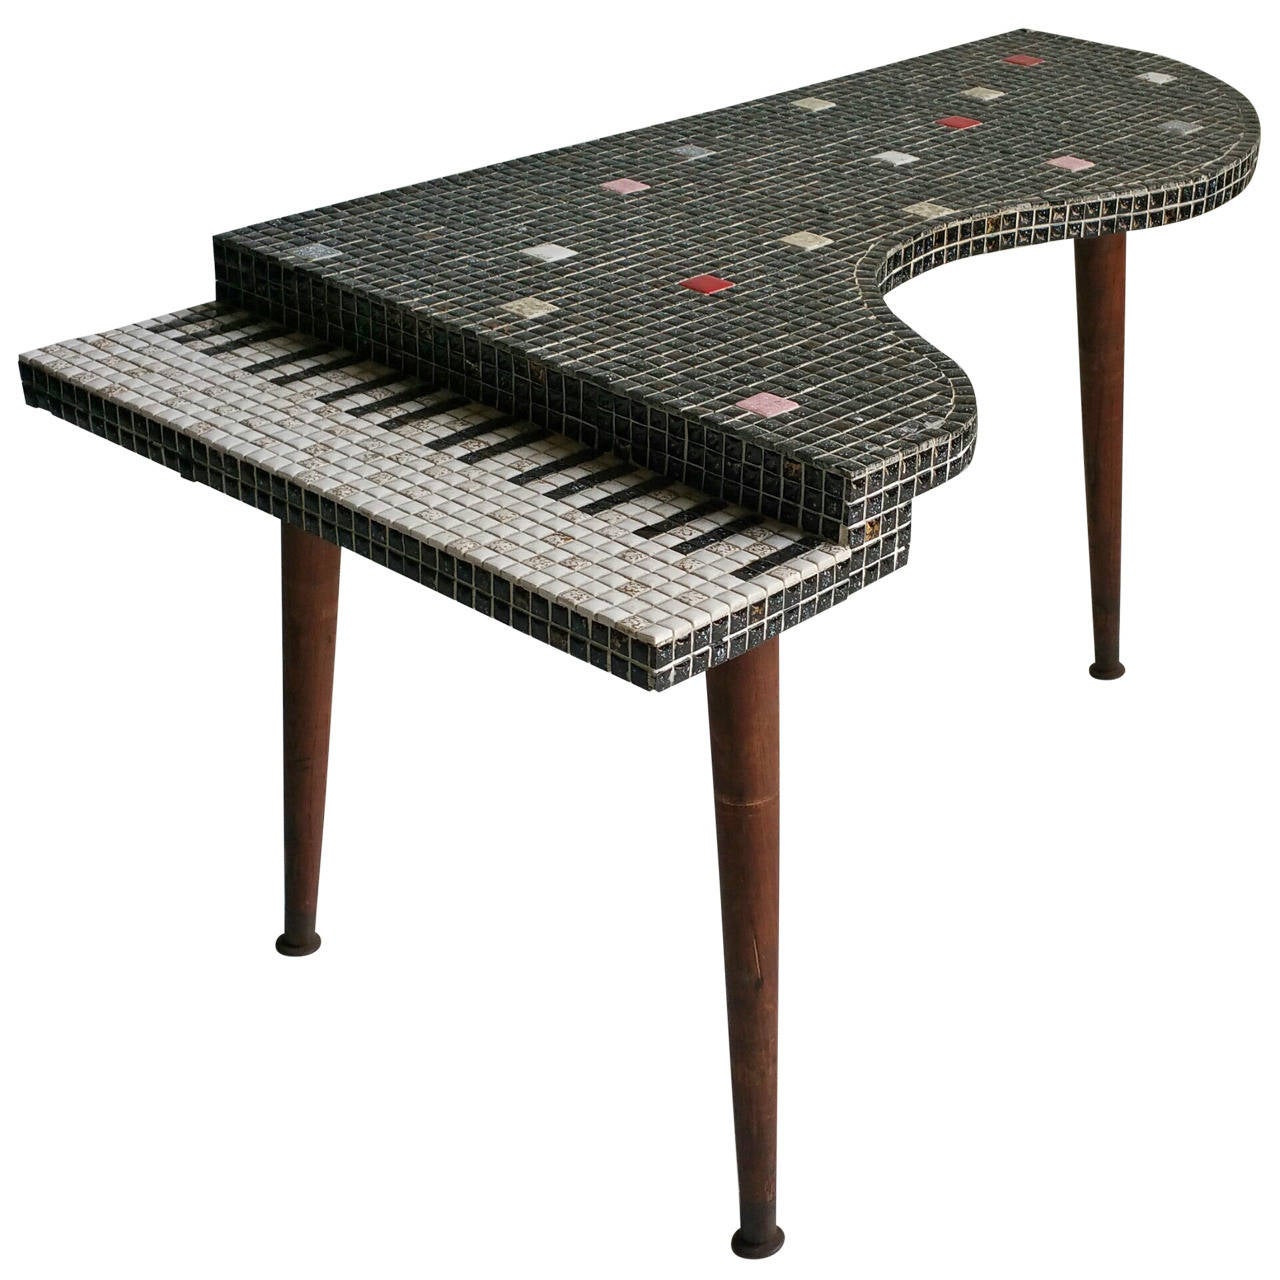 Piano Coffee Table - 3 For Sale on 1stDibs | piano shaped coffee table, piano  tables, piano shaped table